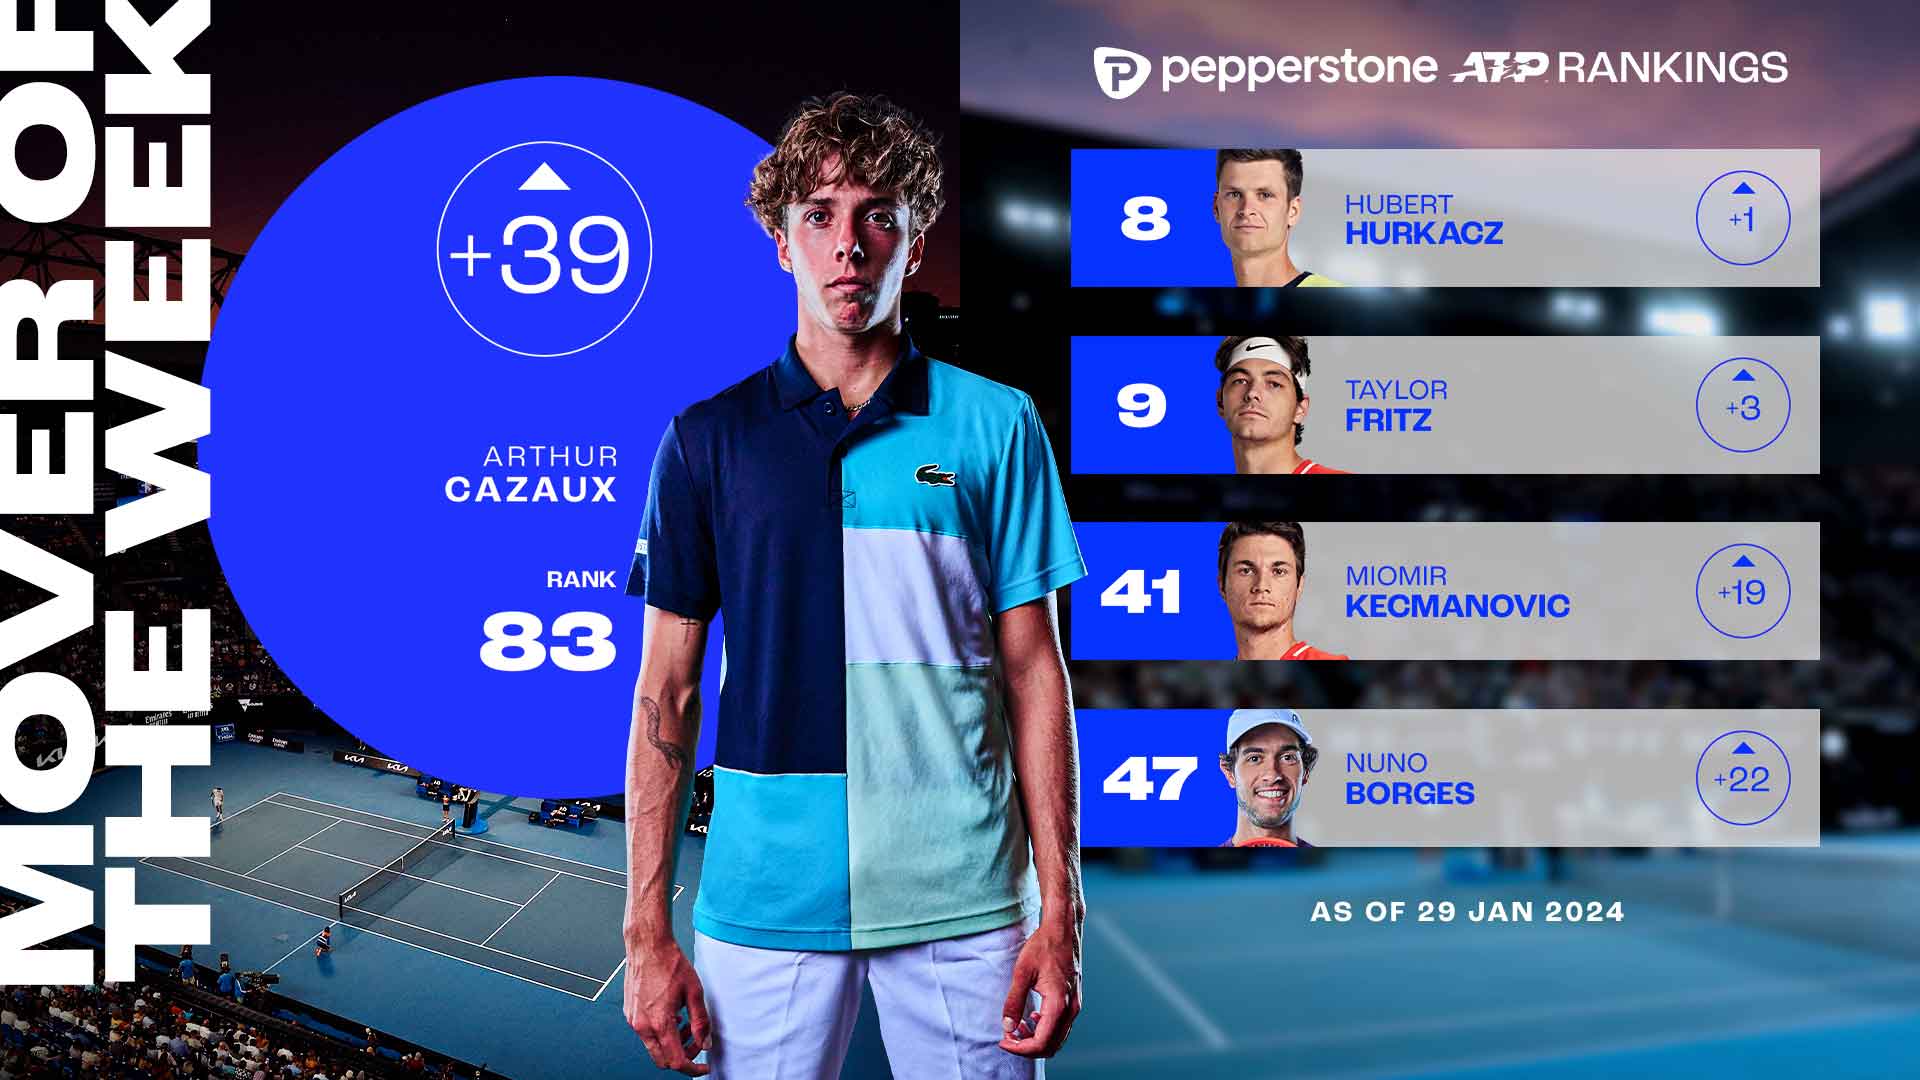 Arthur Cazaux is up to a career-high No. 83 in the Pepperstone ATP Rankings.